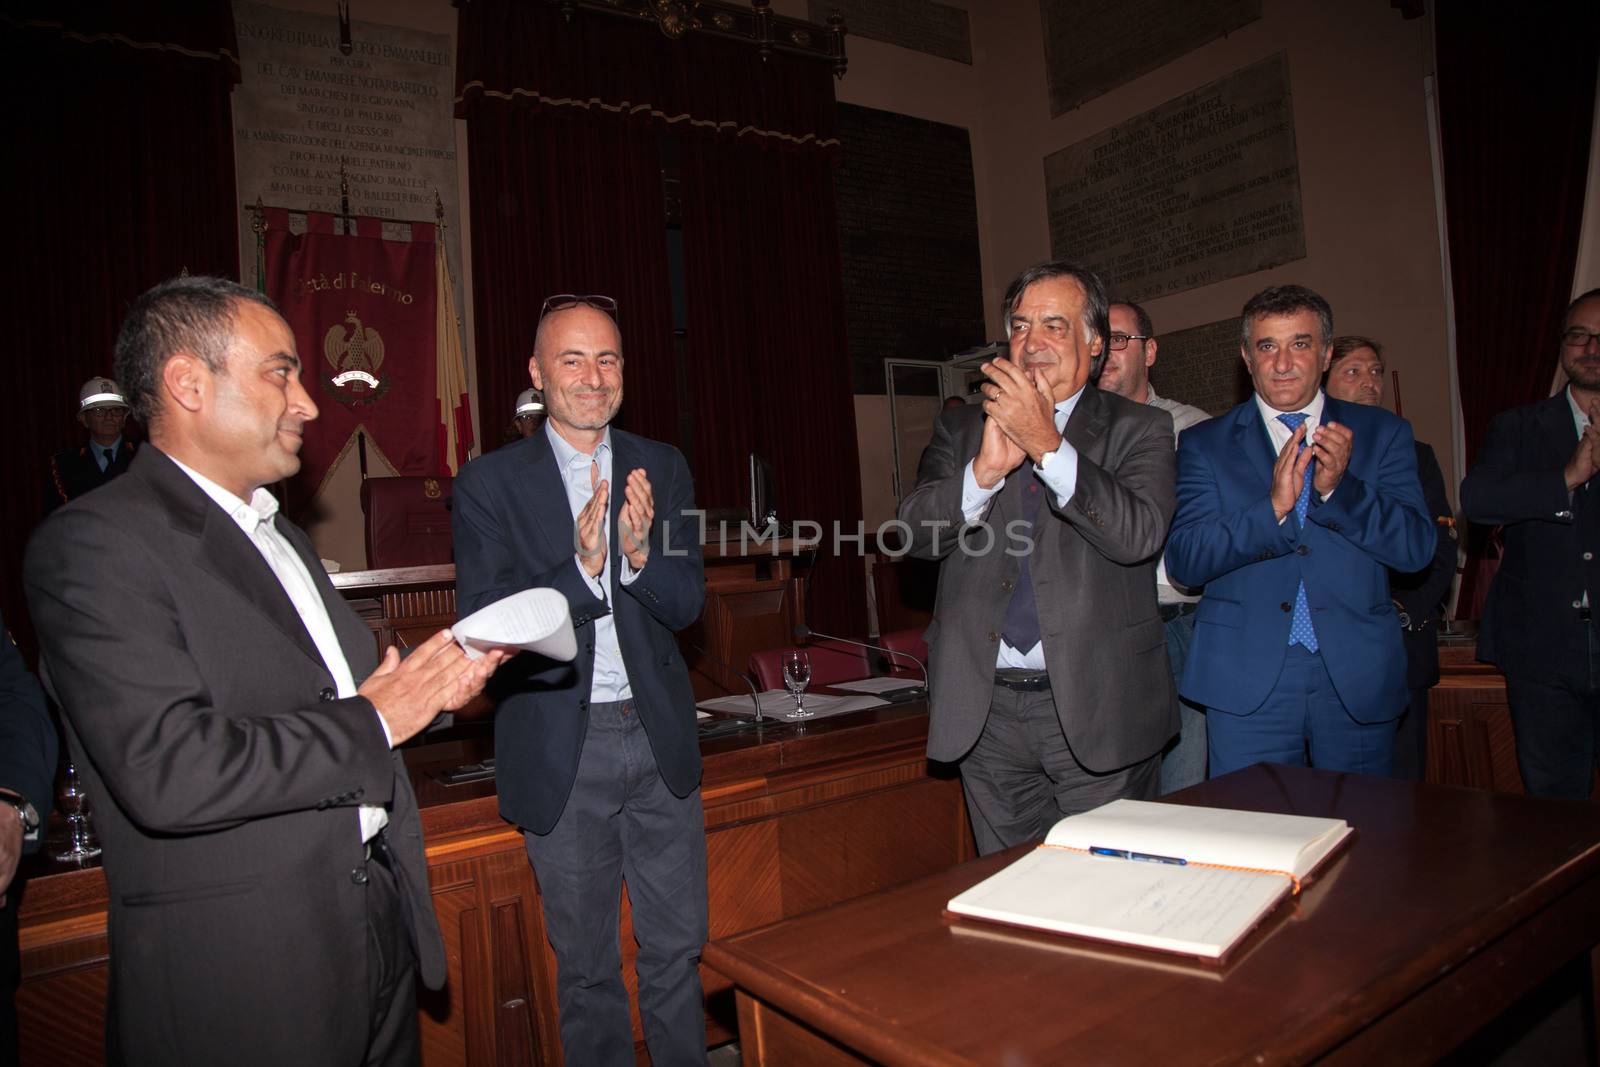 ITALY, Palermo: Doctors Without Borders cultural mediator Ahmad Al Rousan receives an honorary citizenship from Palermo Mayor Leoluca Orlando on September 16, 2015. 